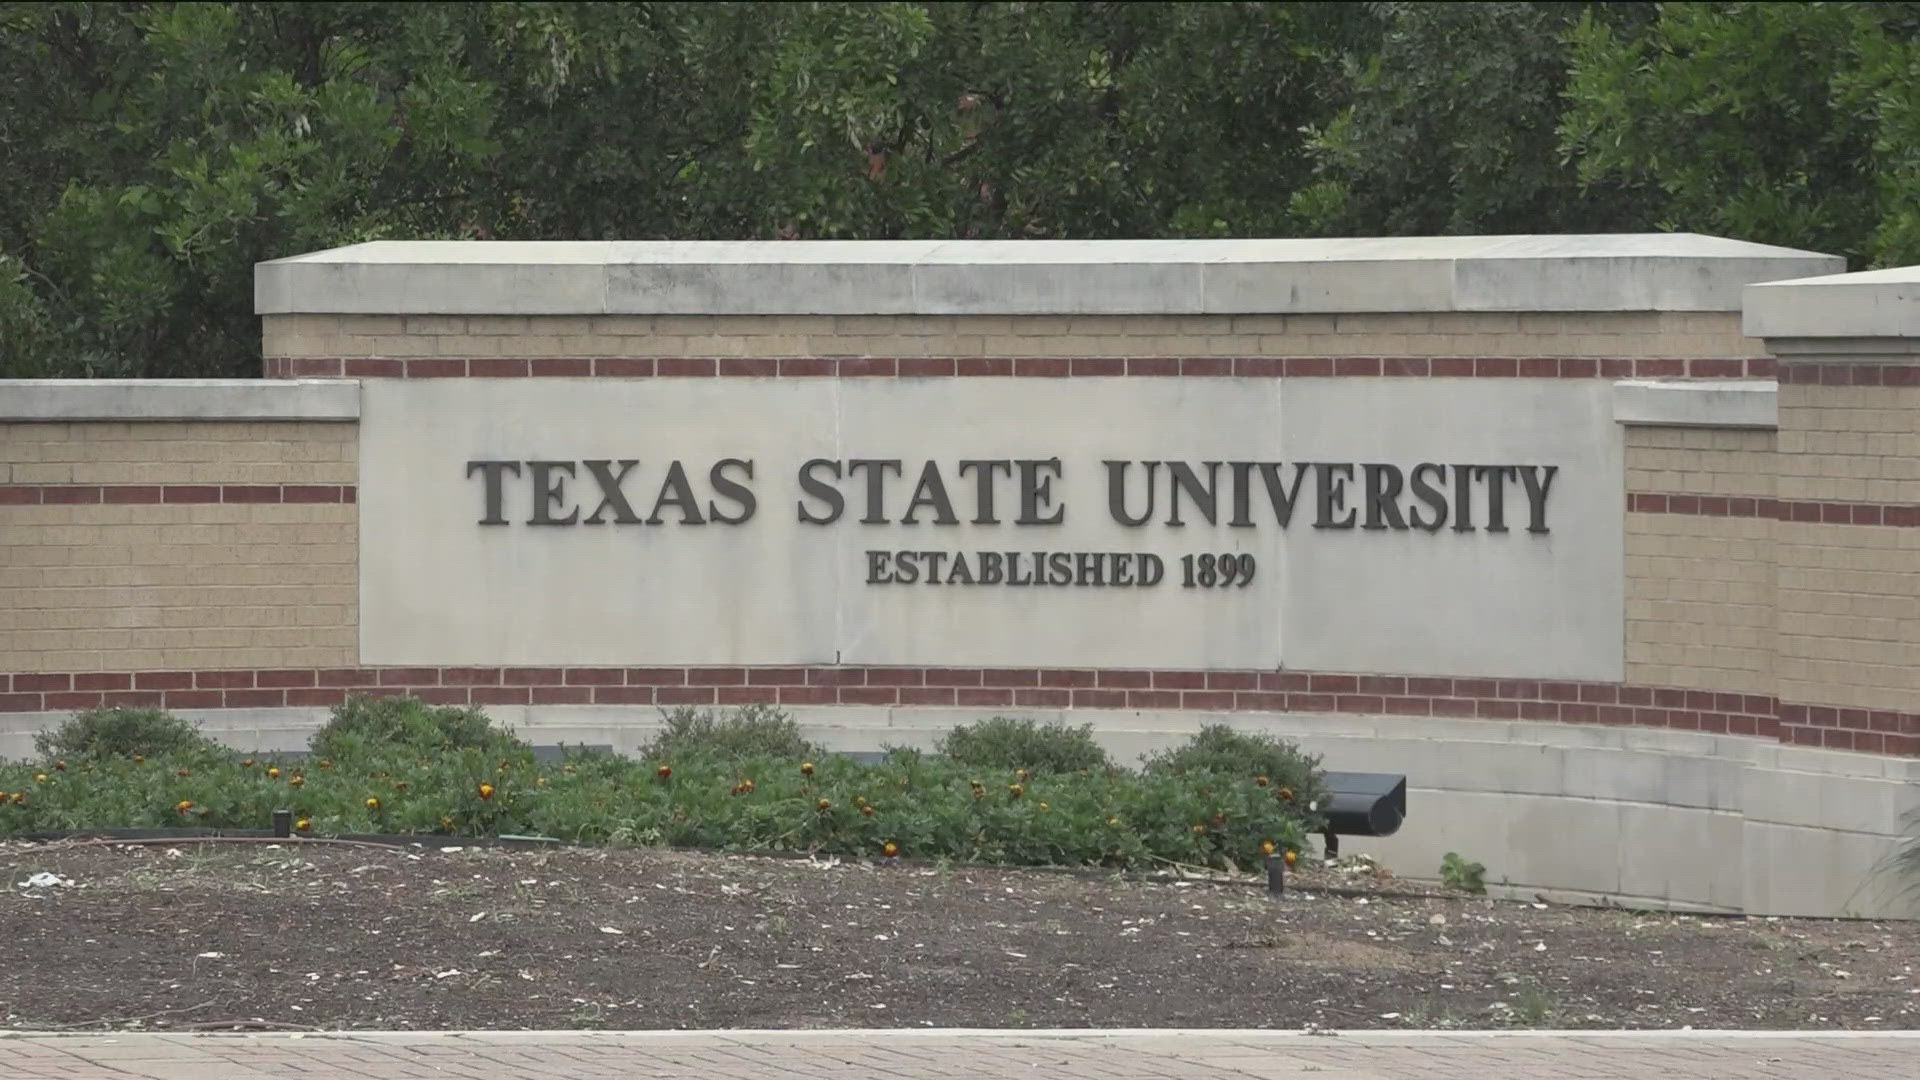 Texas State is supposed to host a presidential debate in September, but with other, earlier debates being announced, that debate may be in jeopardy.